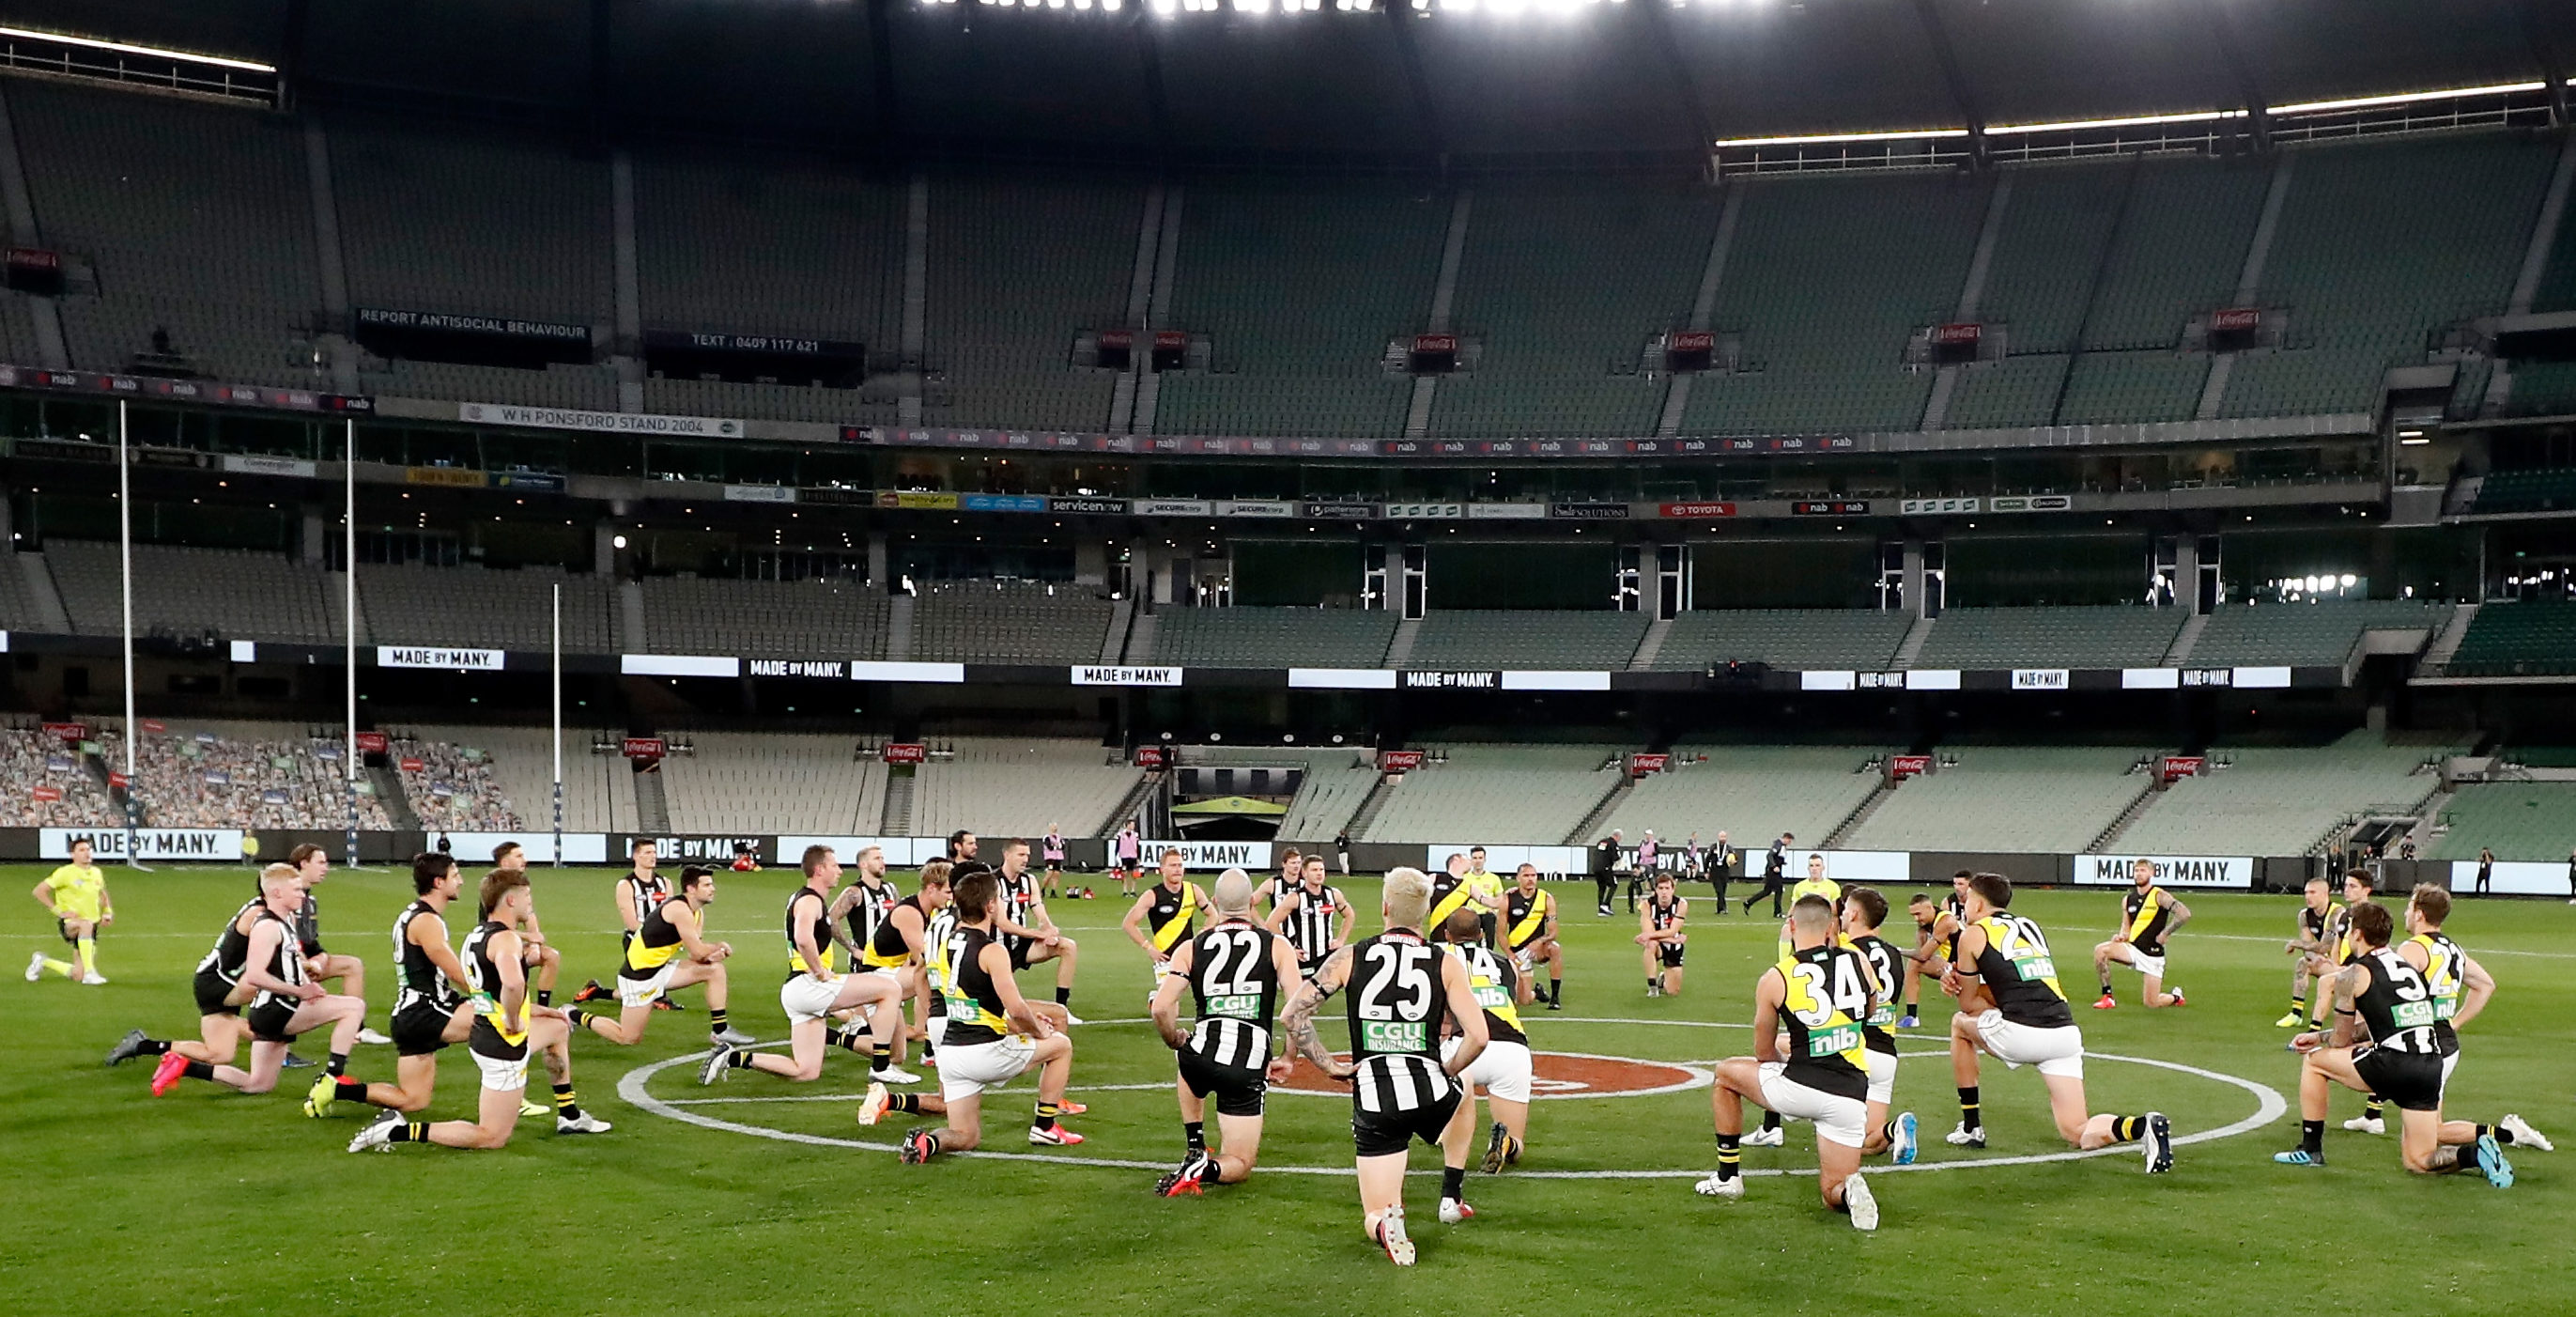 AFL Players Just Took A Knee Before Tonight’s Game In A Powerful Statement Against Racism